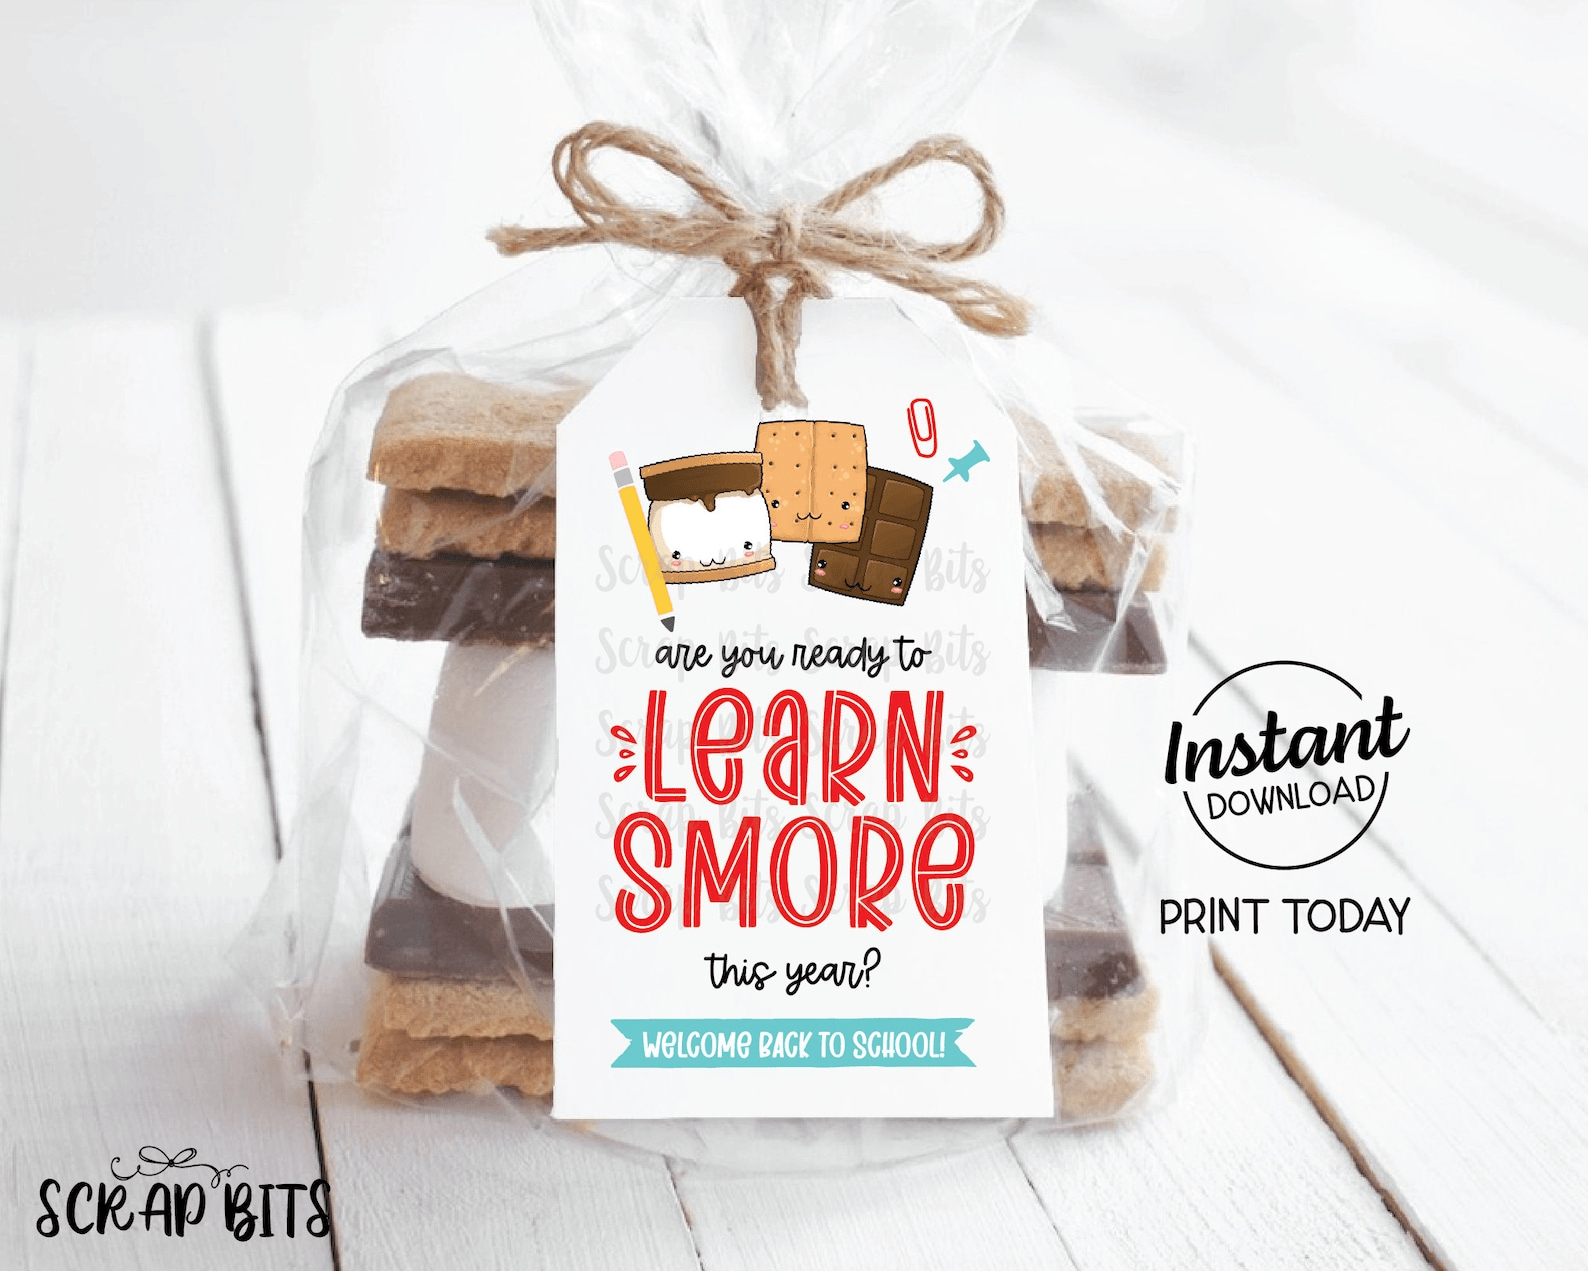 Are You Ready To Learn S'more This Year, Printable Back To School Smore Tags . 5 Digital Print Sizes - Scrap Bits